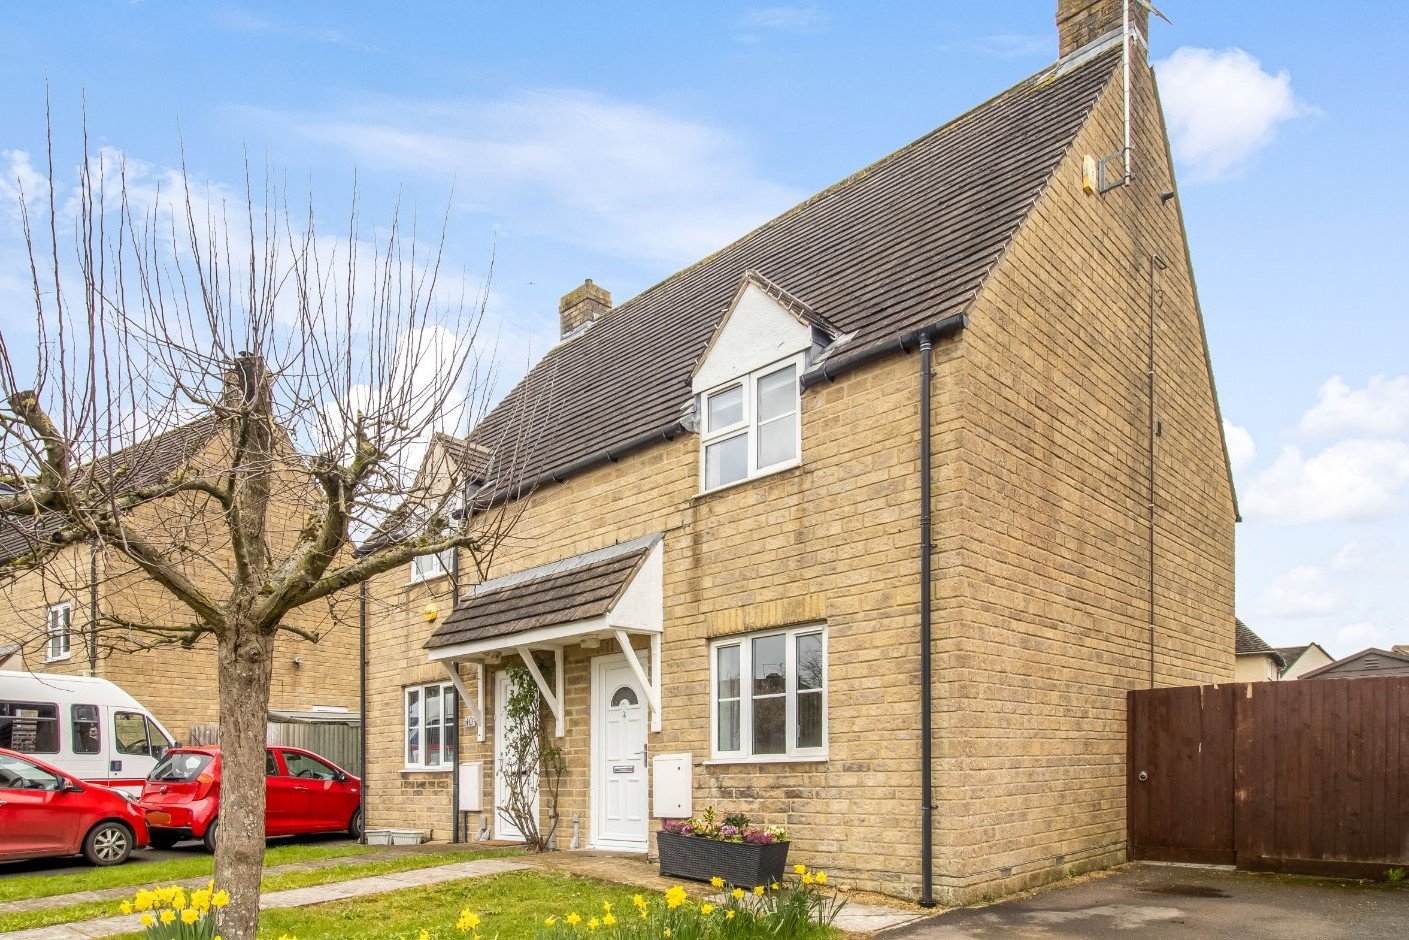 Masefield Road, Cirencester, Gloucestershire, GL7